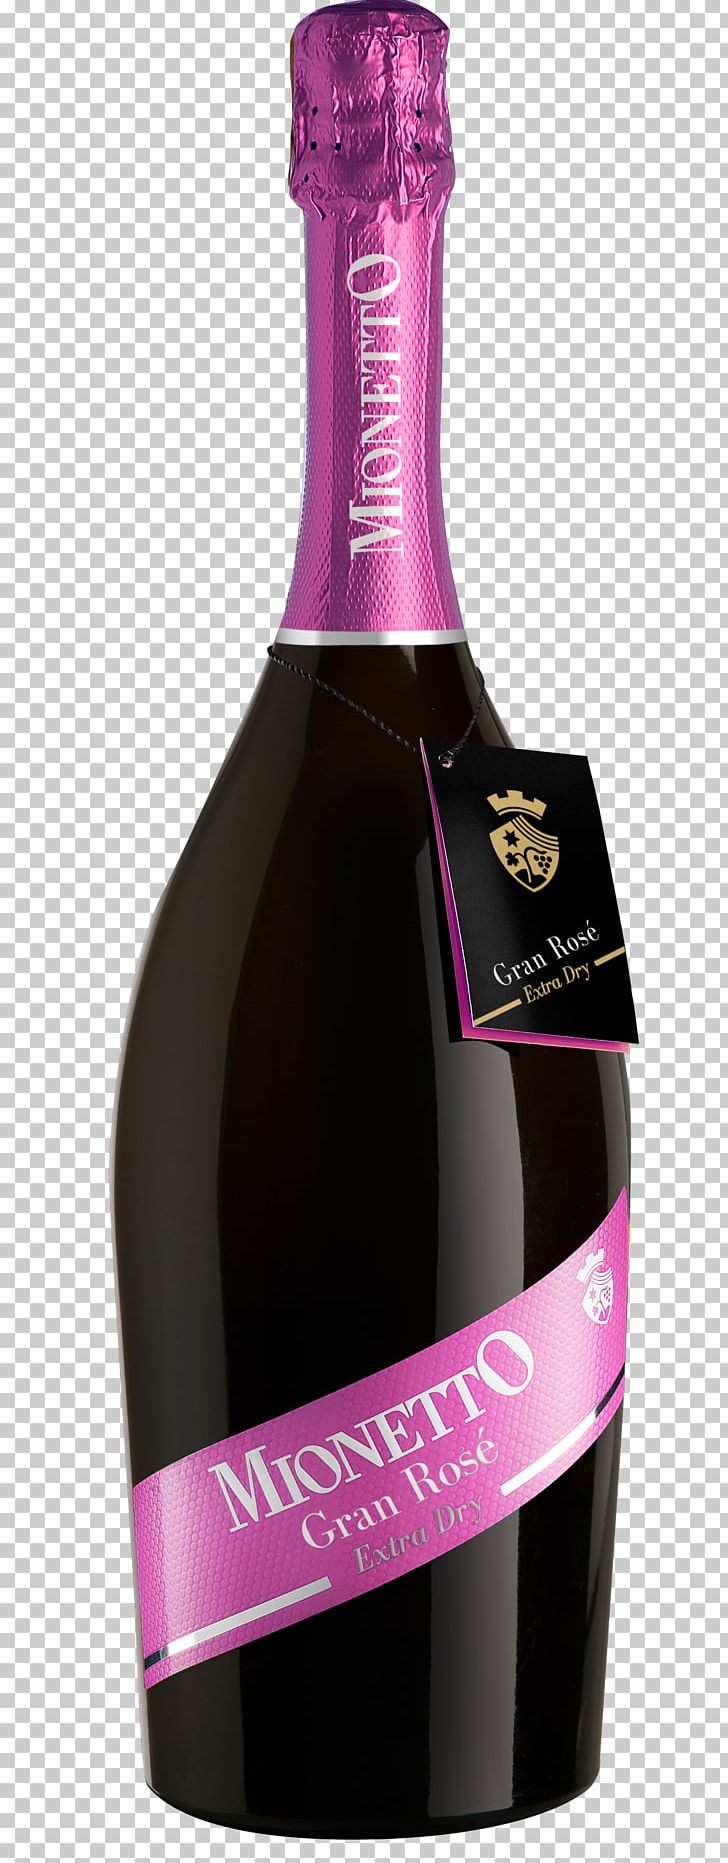 Champagne Mionetto Prosecco "Brut" Rosé Sparkling Wine PNG, Clipart, Alcoholic Beverage, Bottle, Champagne, Drink, Food Drinks Free PNG Download